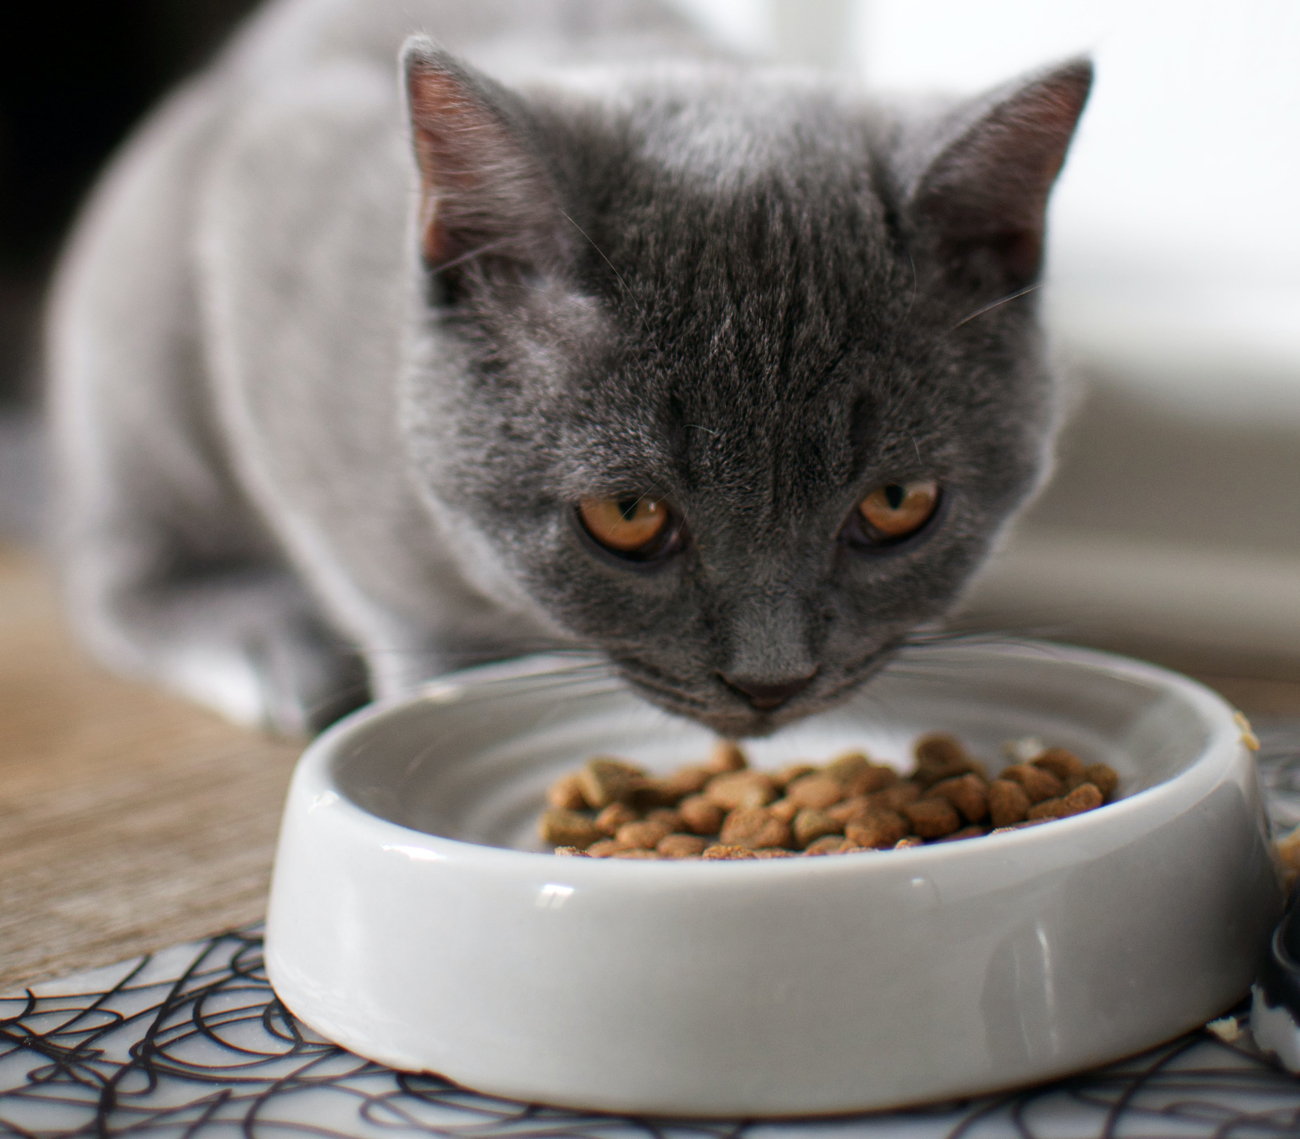 A grey senior cat eating cat biscuits from a food bowl